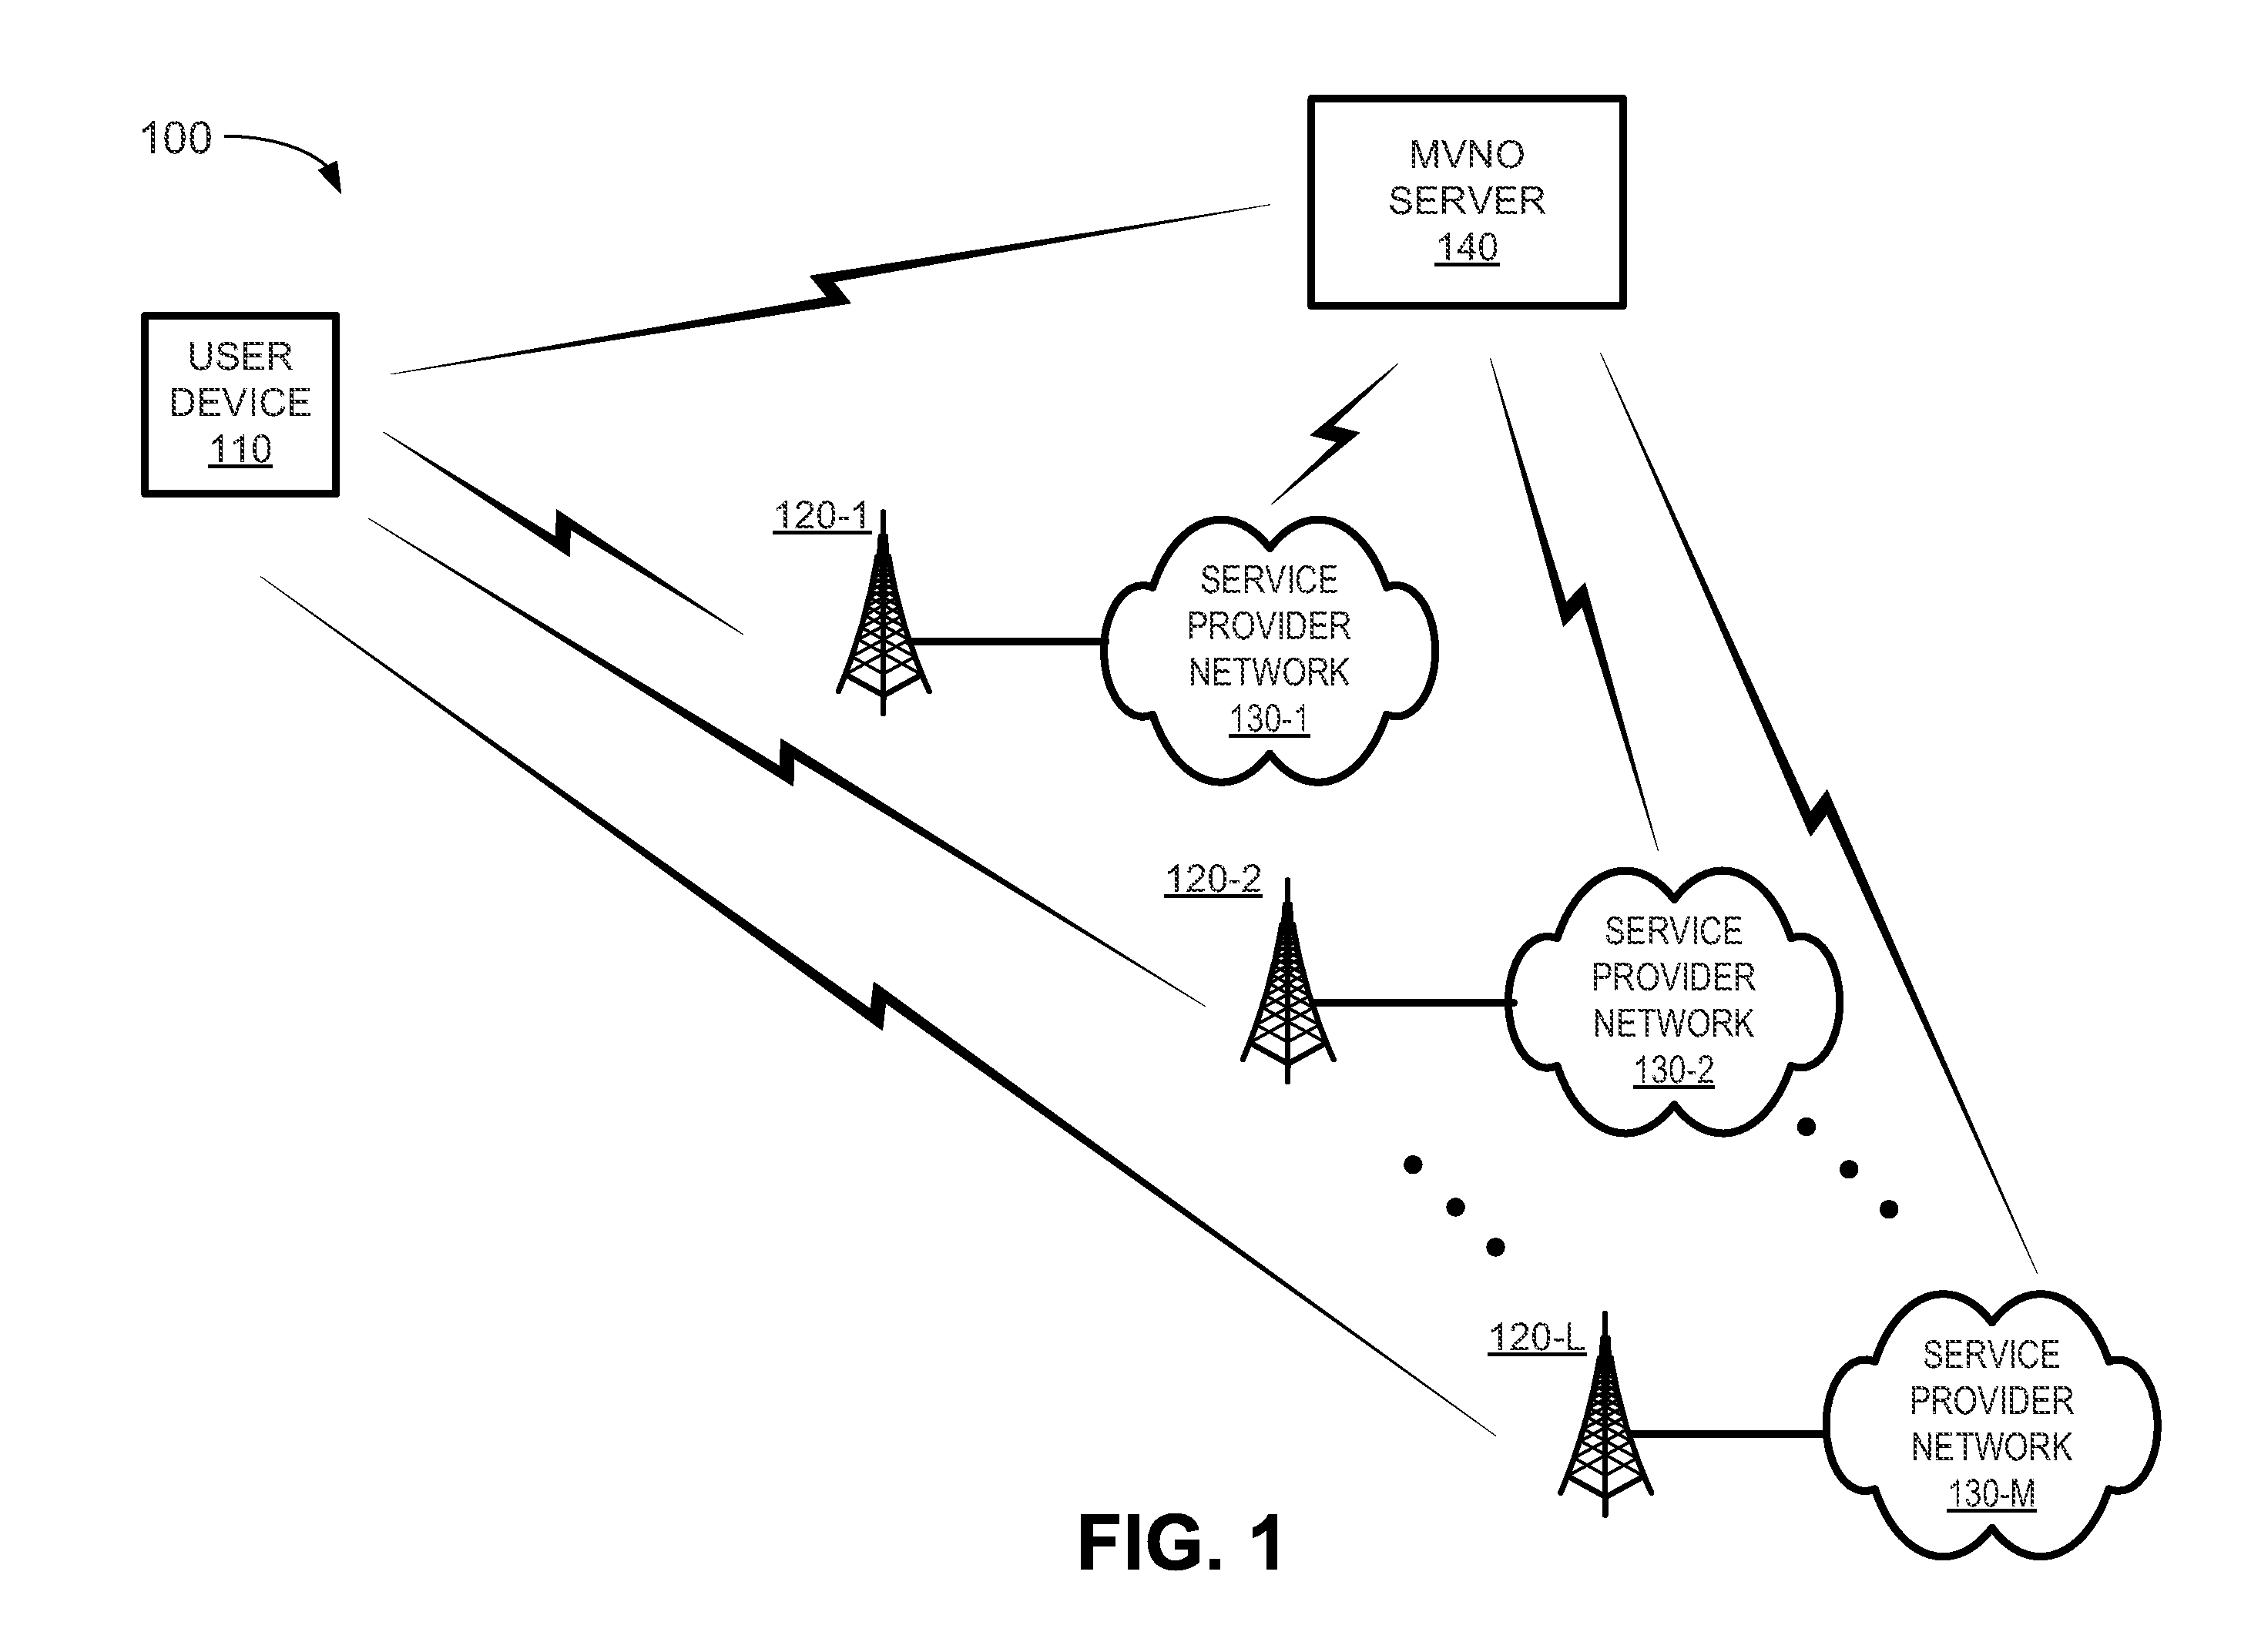 Automated service provider network selection using a wireless air-time auction